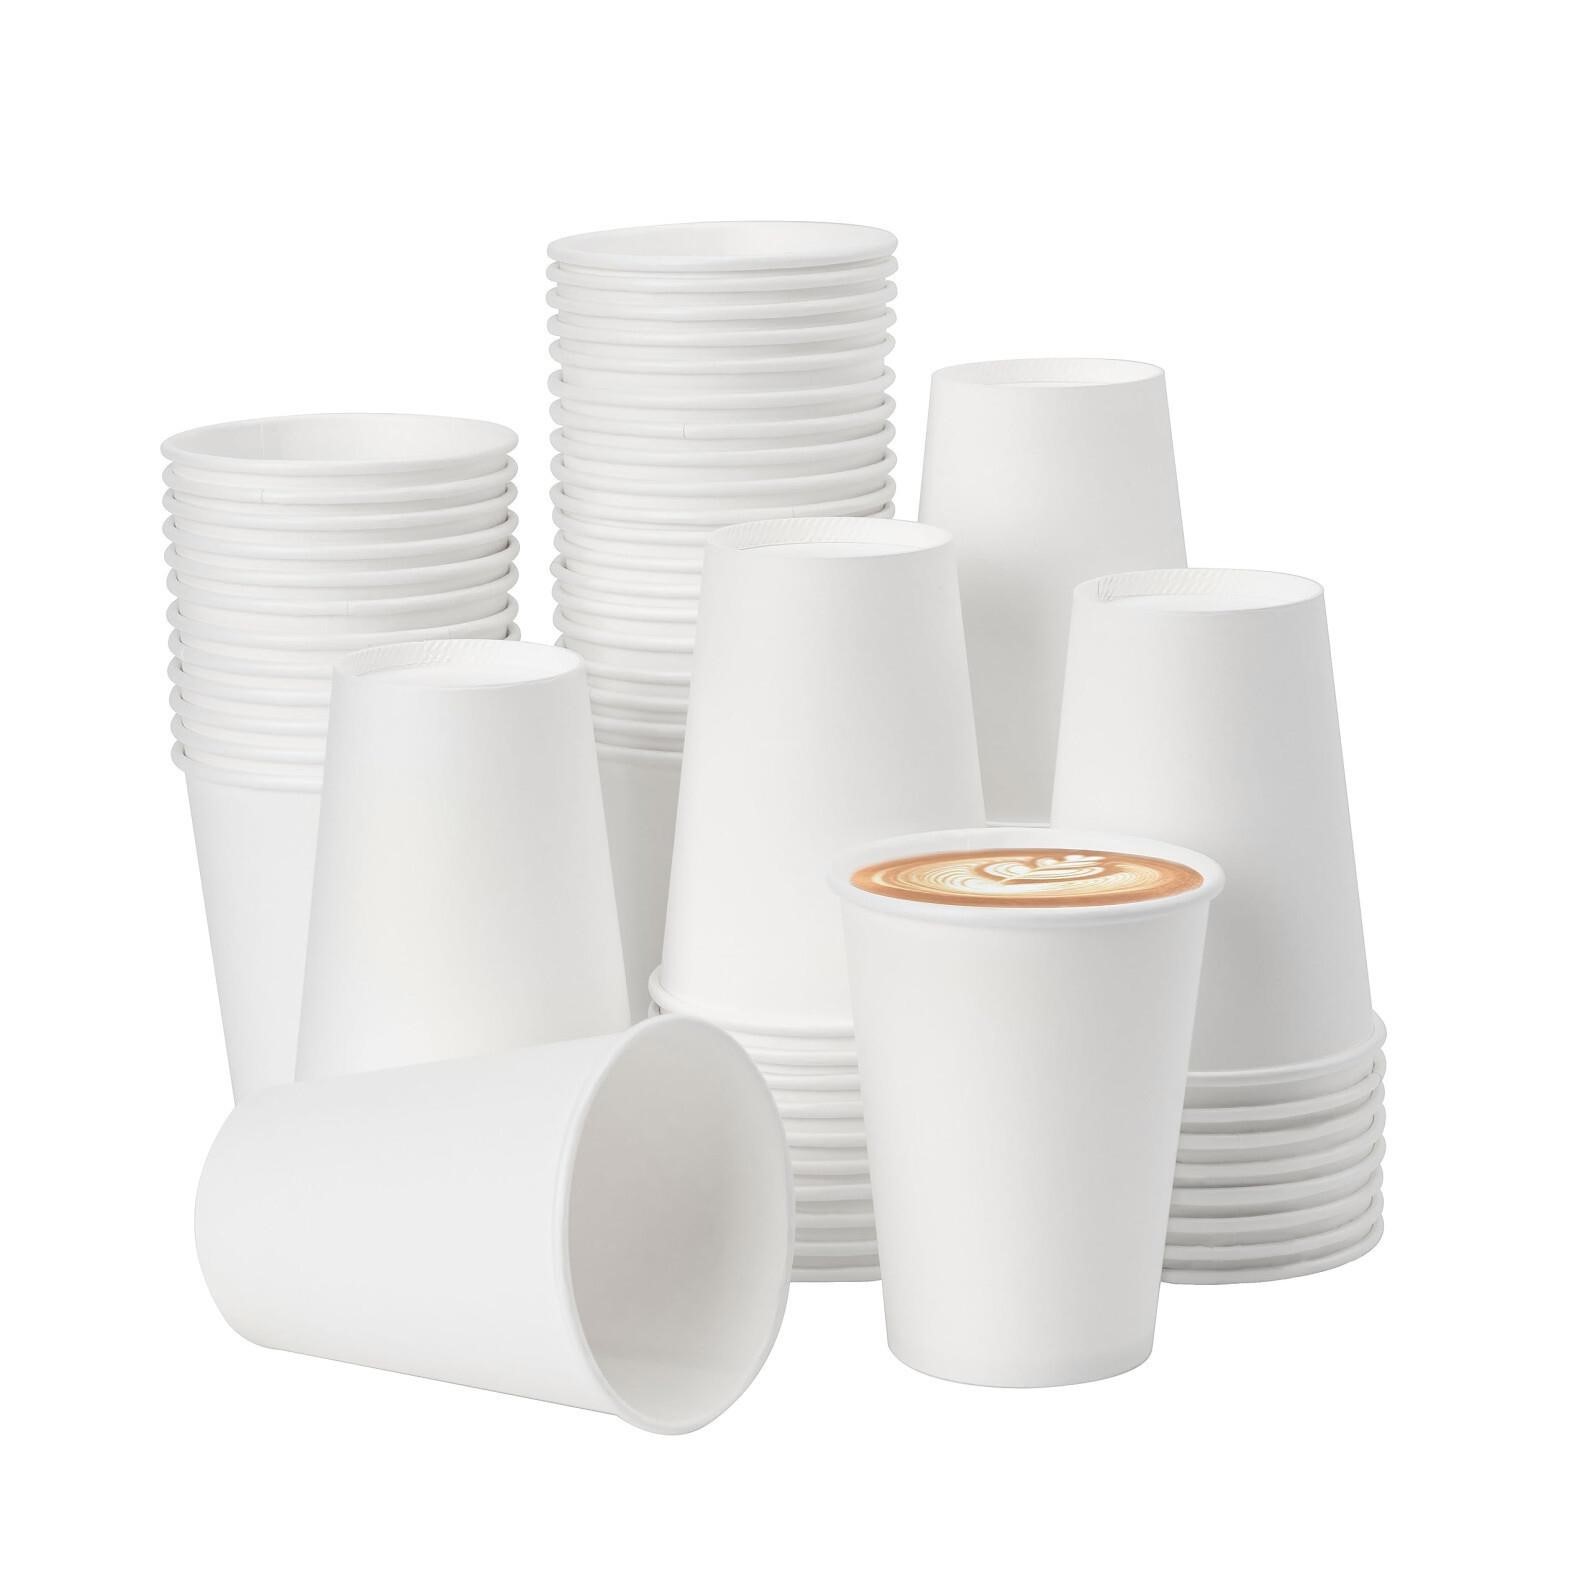 METAPRINT 12 oz Disposable Paper Coffee Cups [300